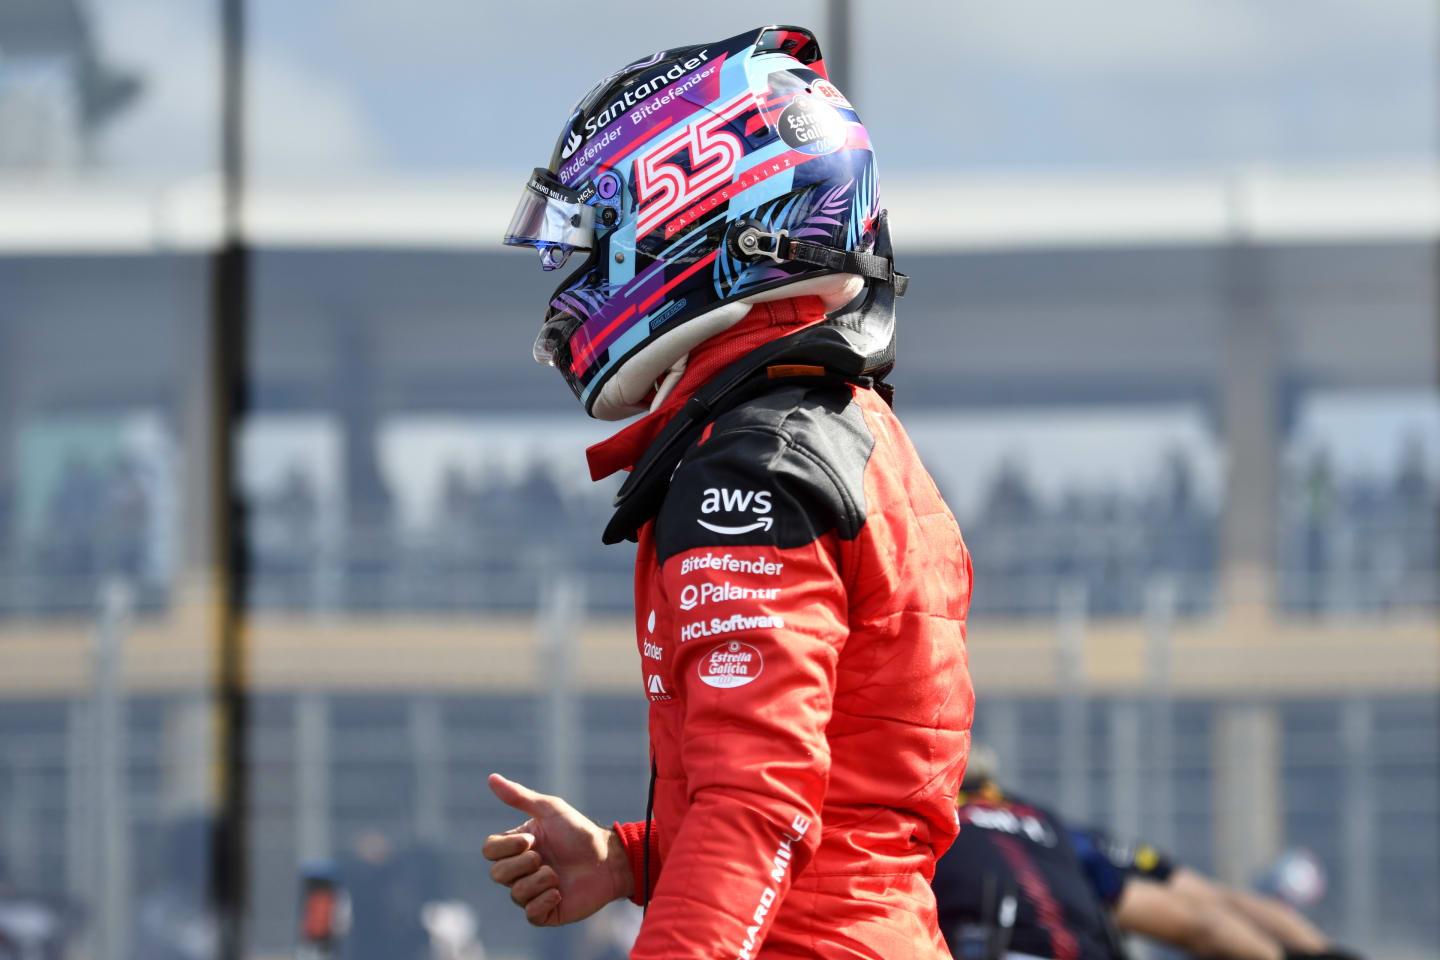 MIAMI, FLORIDA - MAY 06: Third placed qualifier Carlos Sainz of Spain and Ferrari climbs from his car in parc ferme during qualifying ahead of the F1 Grand Prix of Miami at Miami International Autodrome on May 06, 2023 in Miami, Florida. (Photo by Rudy Carezzevoli/Getty Images)